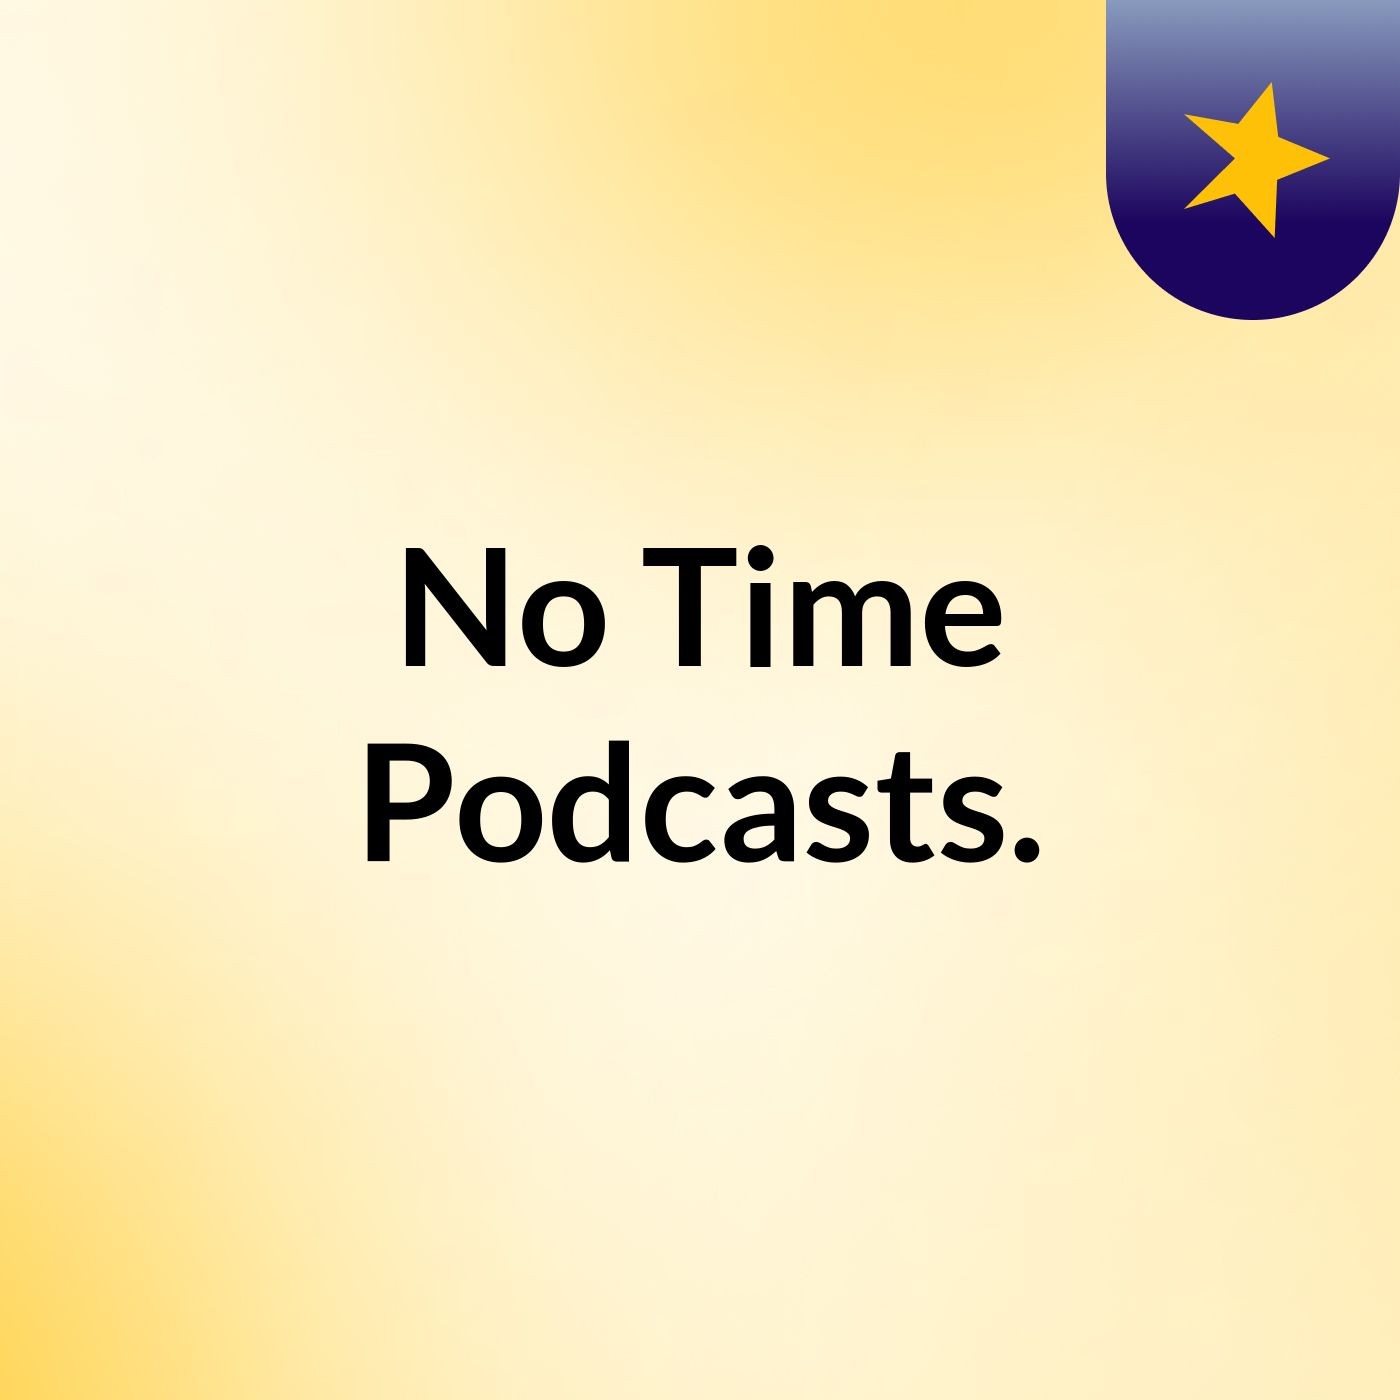 No Time Podcasts: Things and thoughts